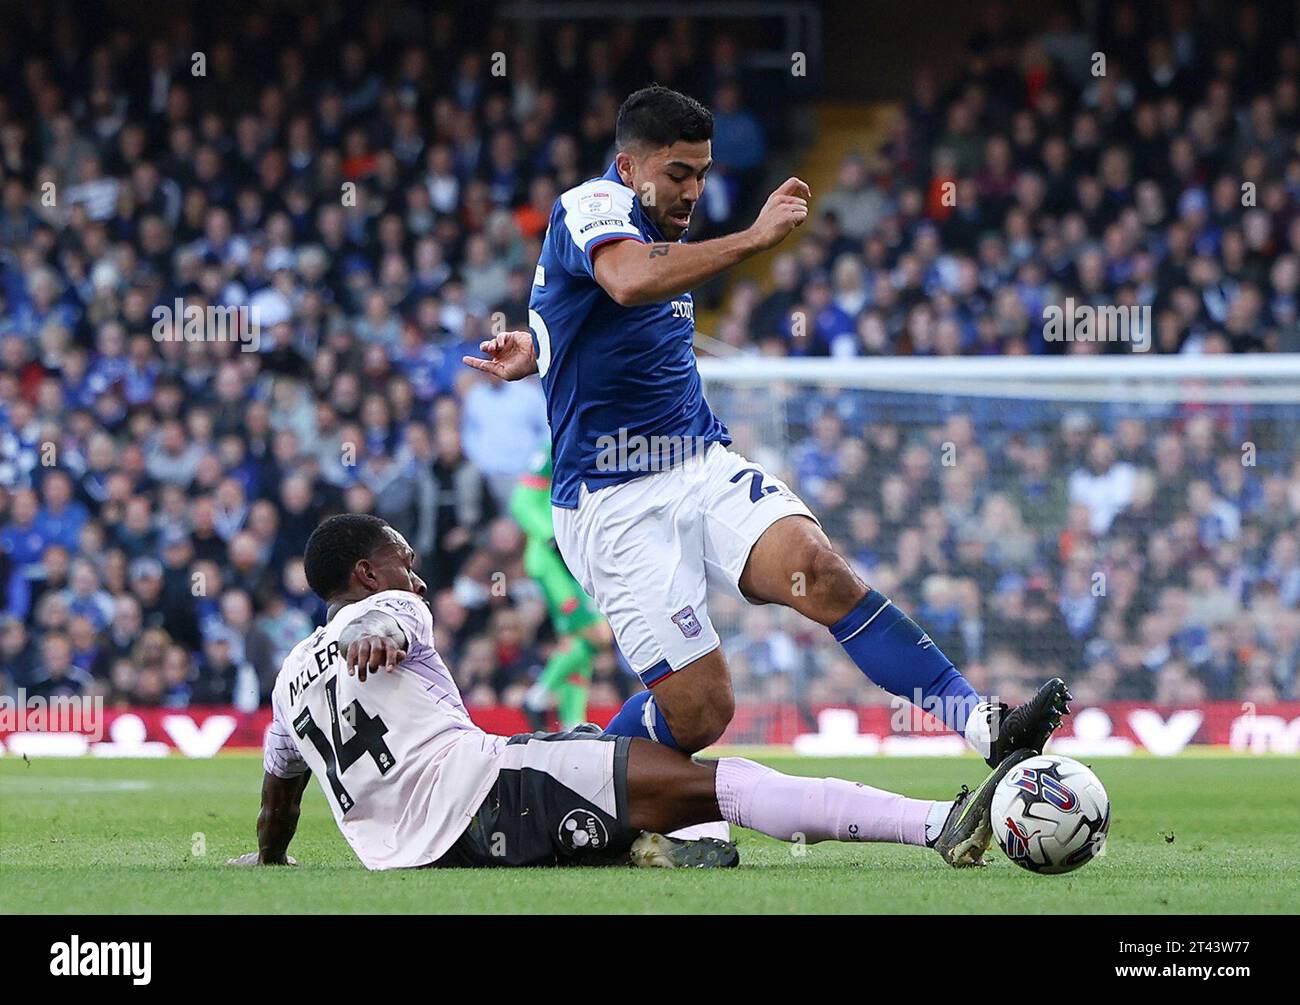 Ipswich Town's Massimo Luongo is tackled by Plymouth Argyle's Mickel Miller during the Sky Bet Championship match at Portman Road, Ipswich. Picture date: Saturday October 28, 2023. Stock Photo